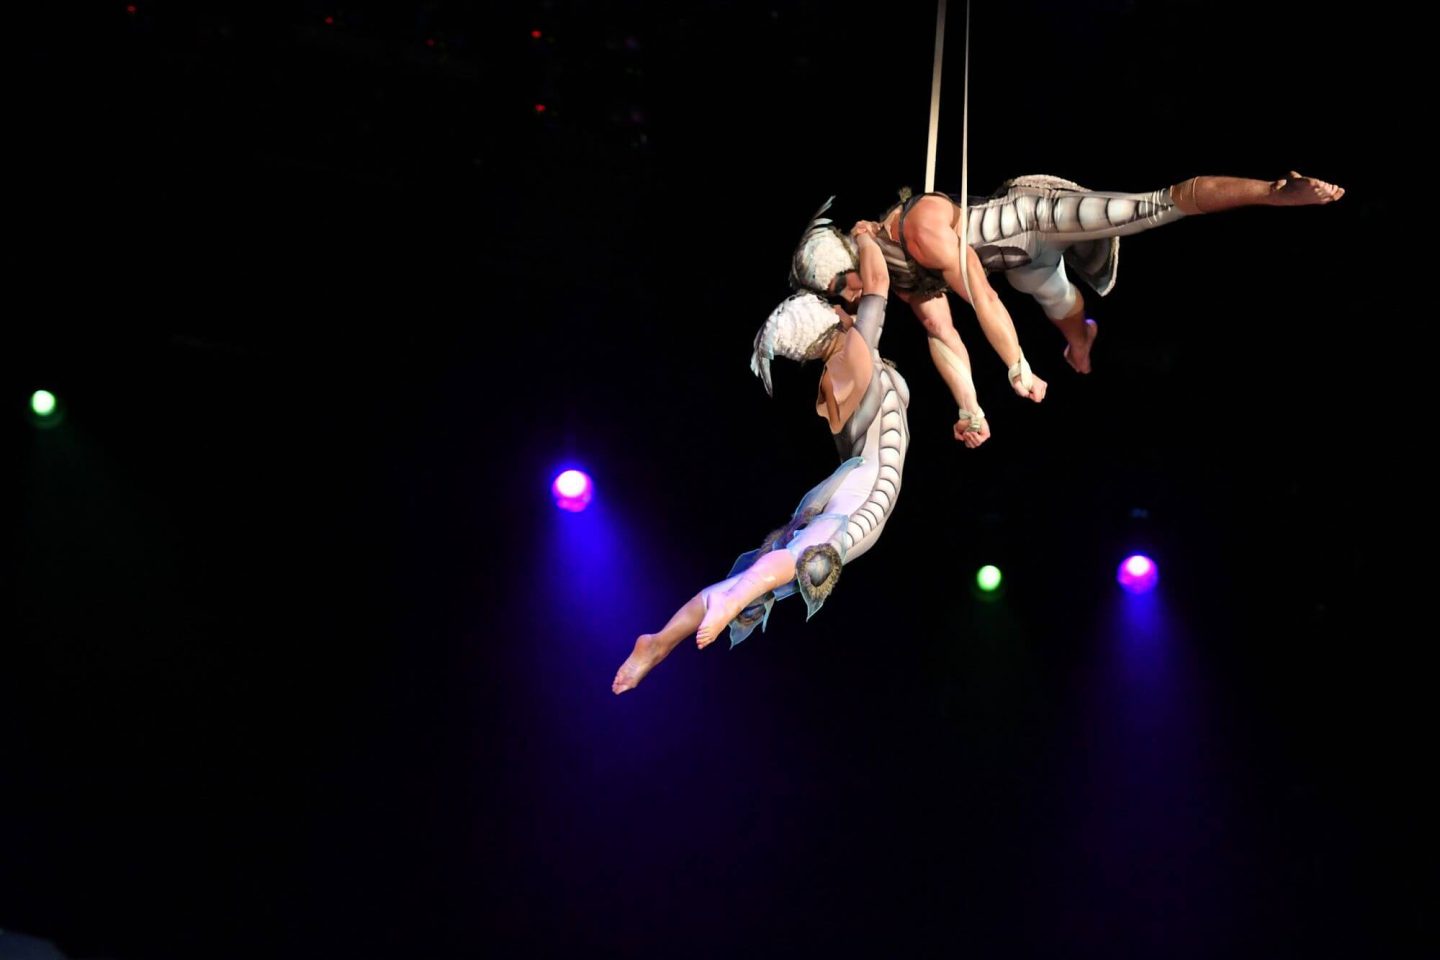 Ovo Cirque du Soleil performers hanging from ropes